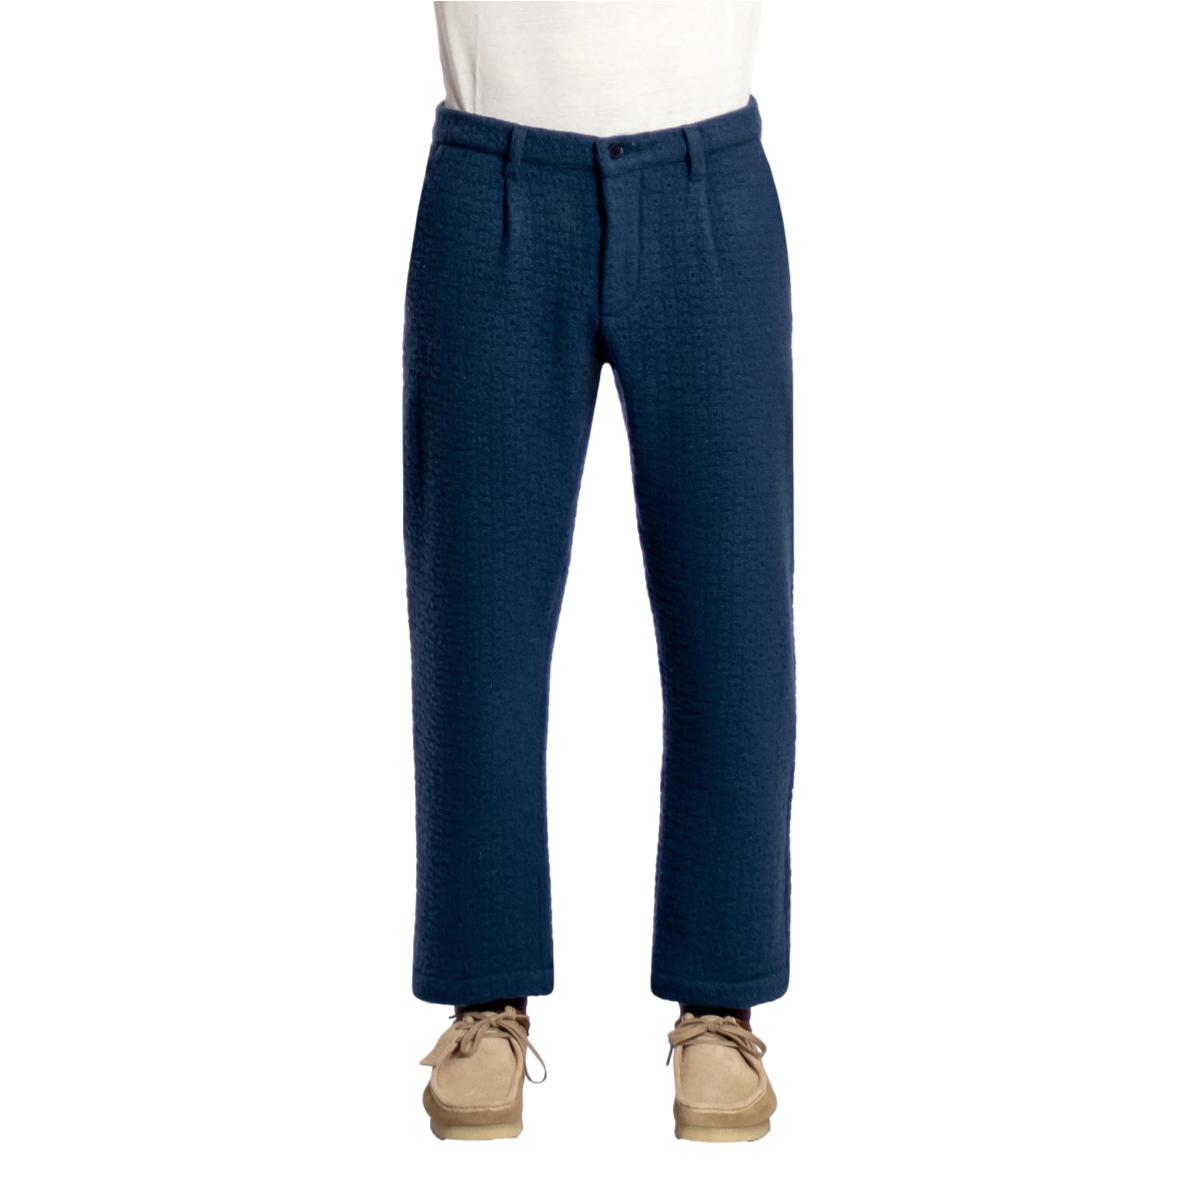 Ryder Trouser Insignia Blue Textured Jacquard - Pants